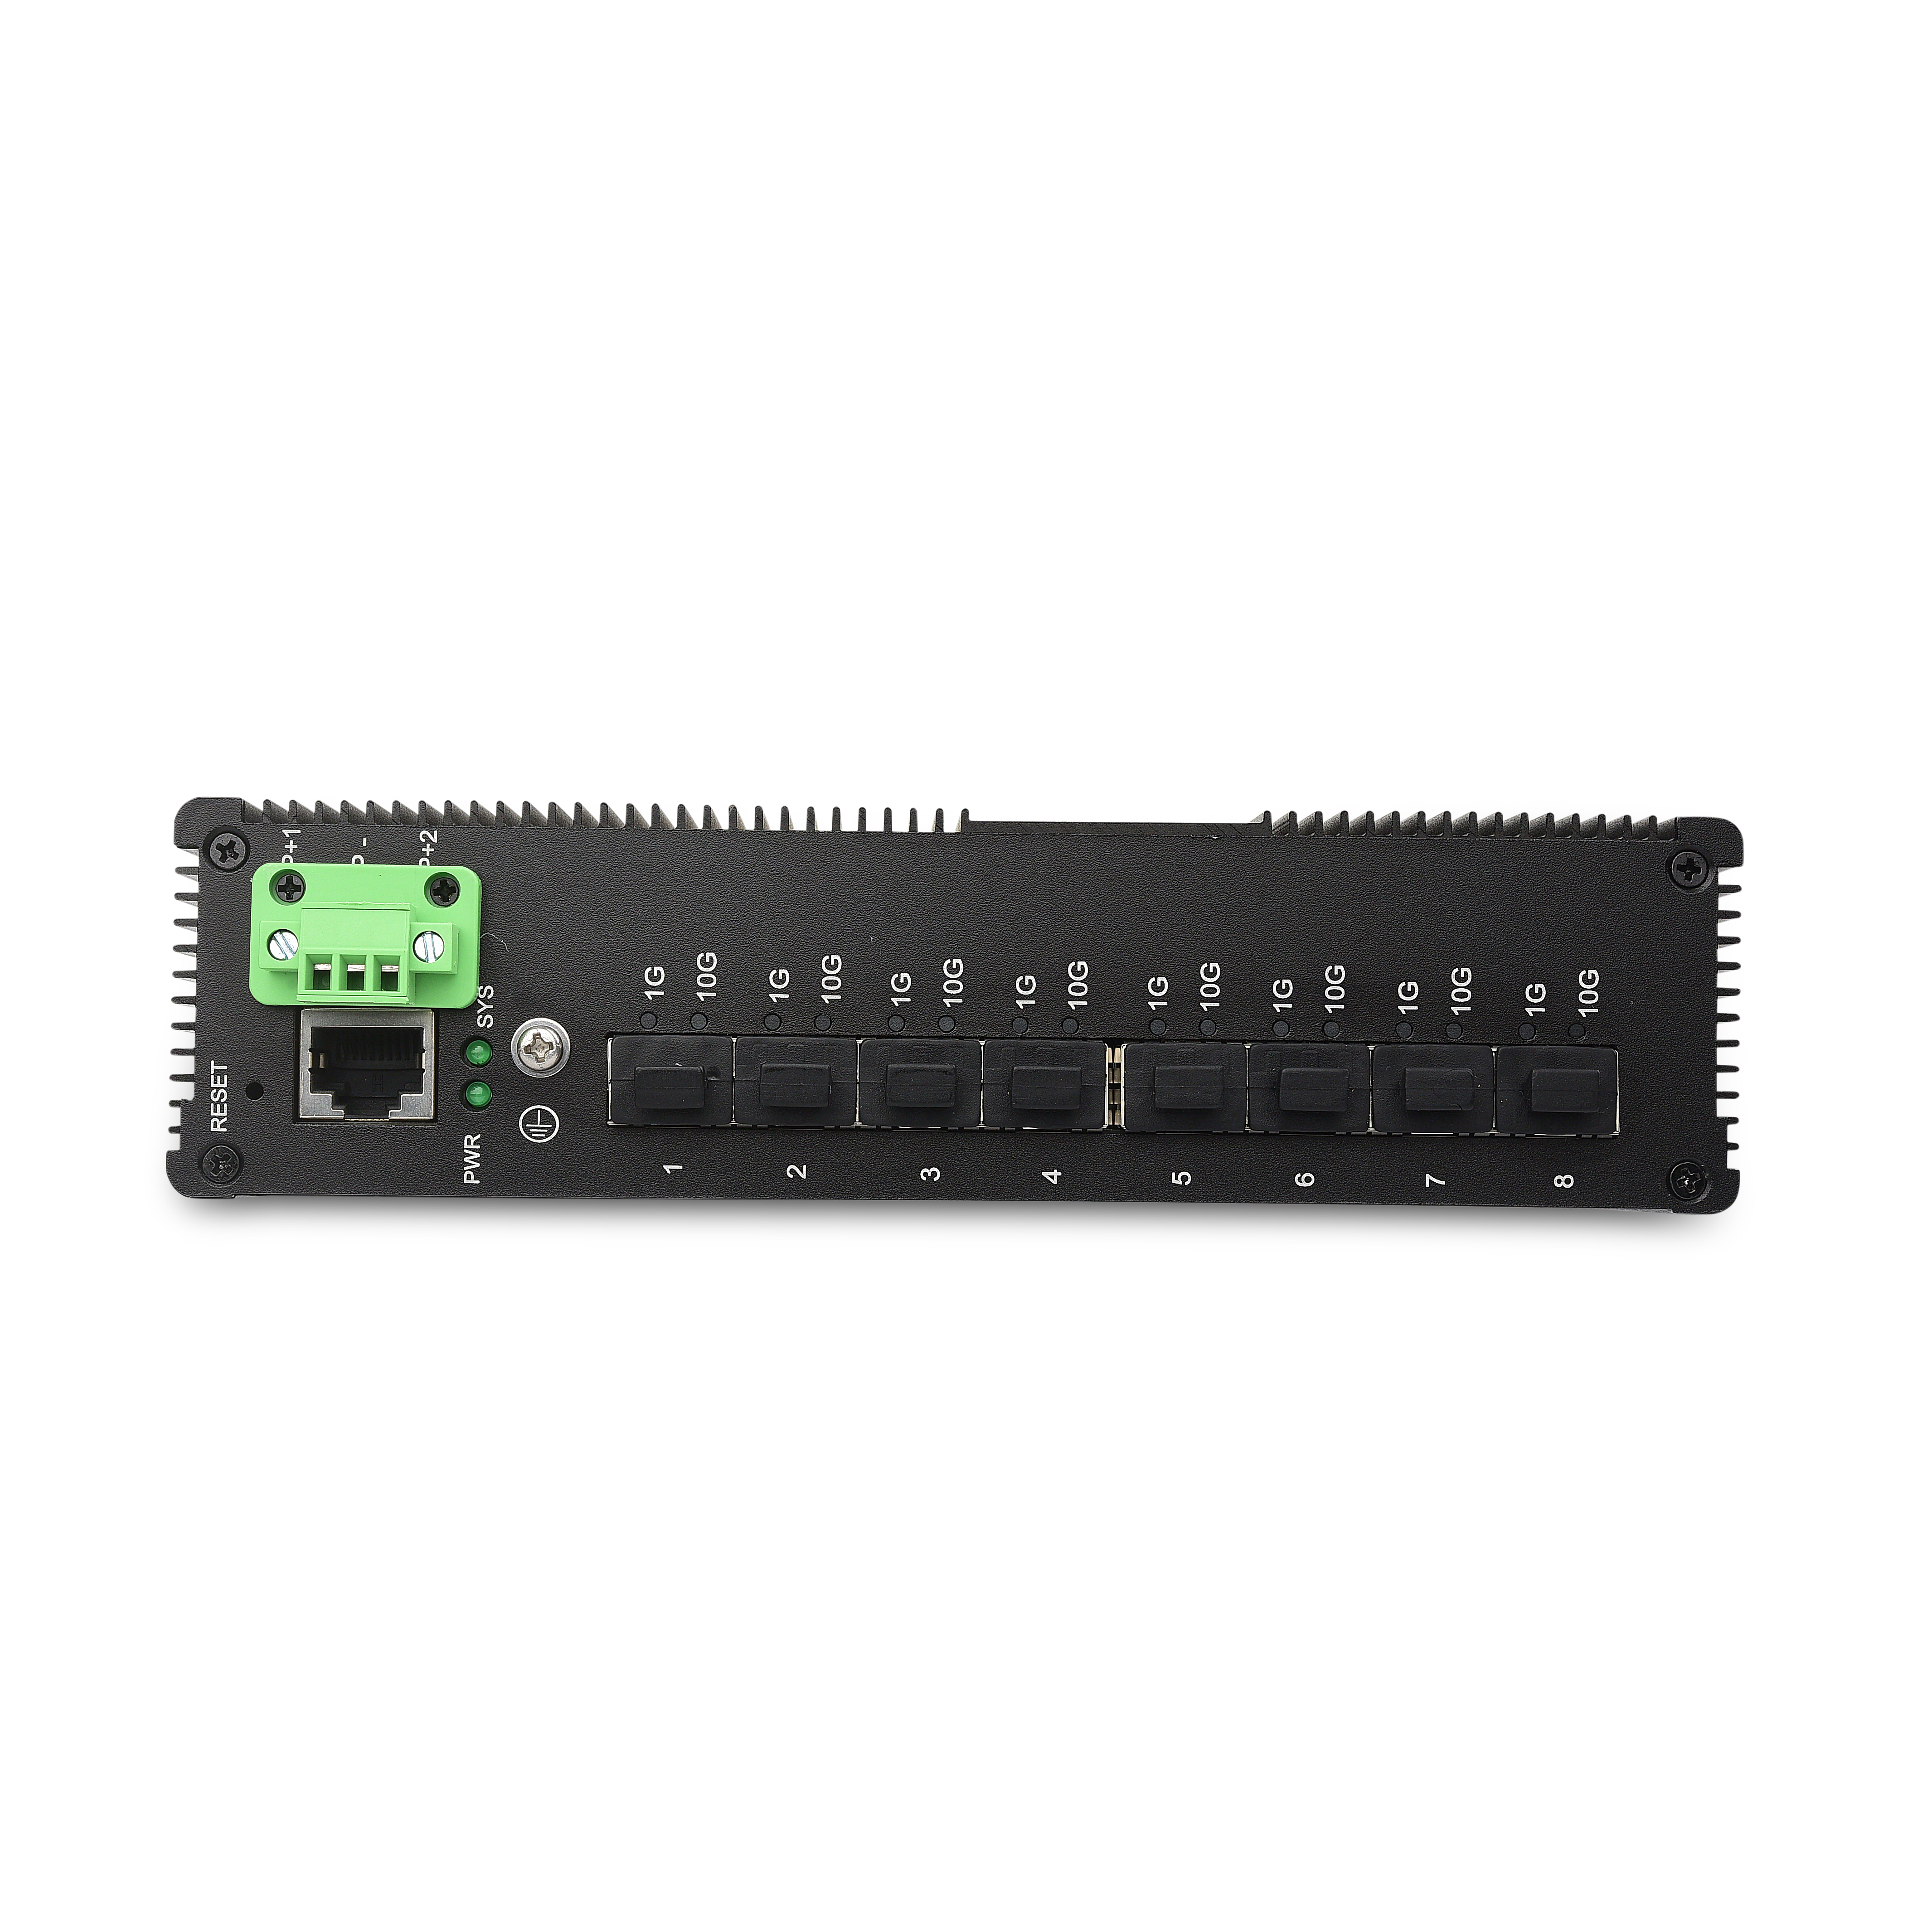 Wholesale China Ethernet Managed Industrial Manufacturers Pricelist - 8 10G SFP+ Slot | L2/L3 Managed Industrial Ethernet Switch JHA-MIWS08H – JHA